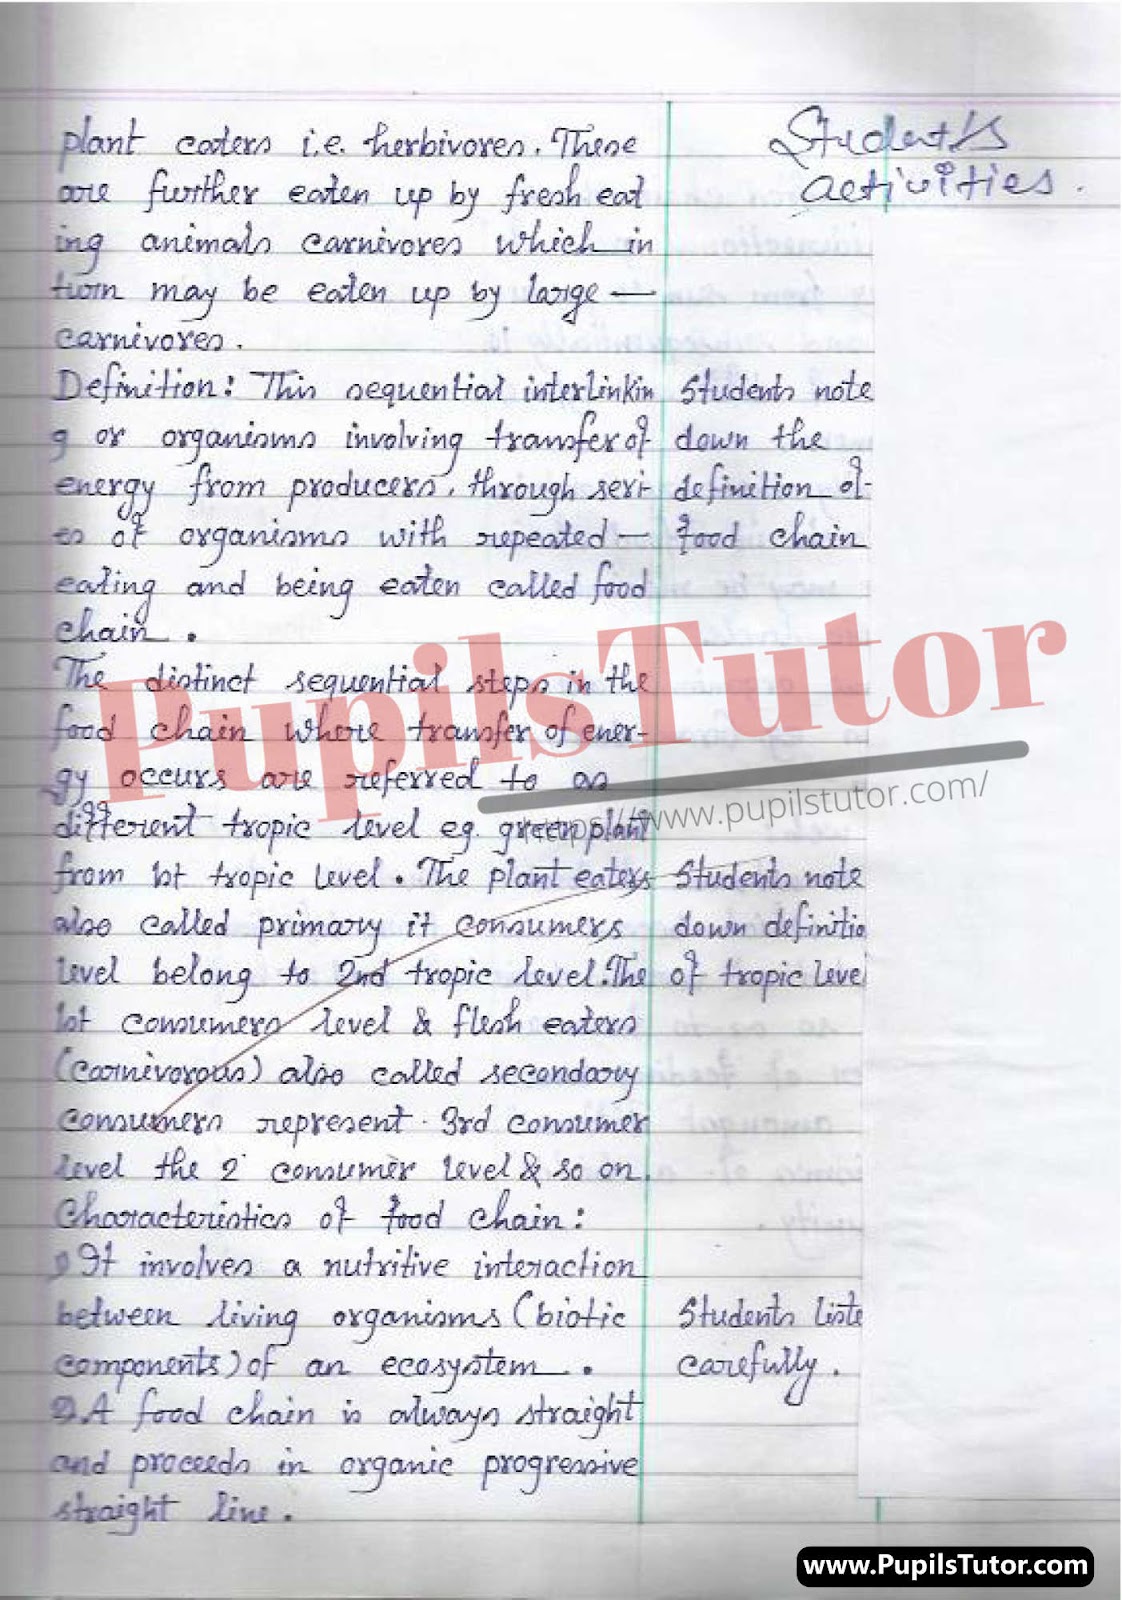 Science Lesson Plan On Food Chain For Class/Grade 4,5,6 and 7 For CBSE NCERT School And College Teachers  – (Page And Image Number 3) – www.pupilstutor.com